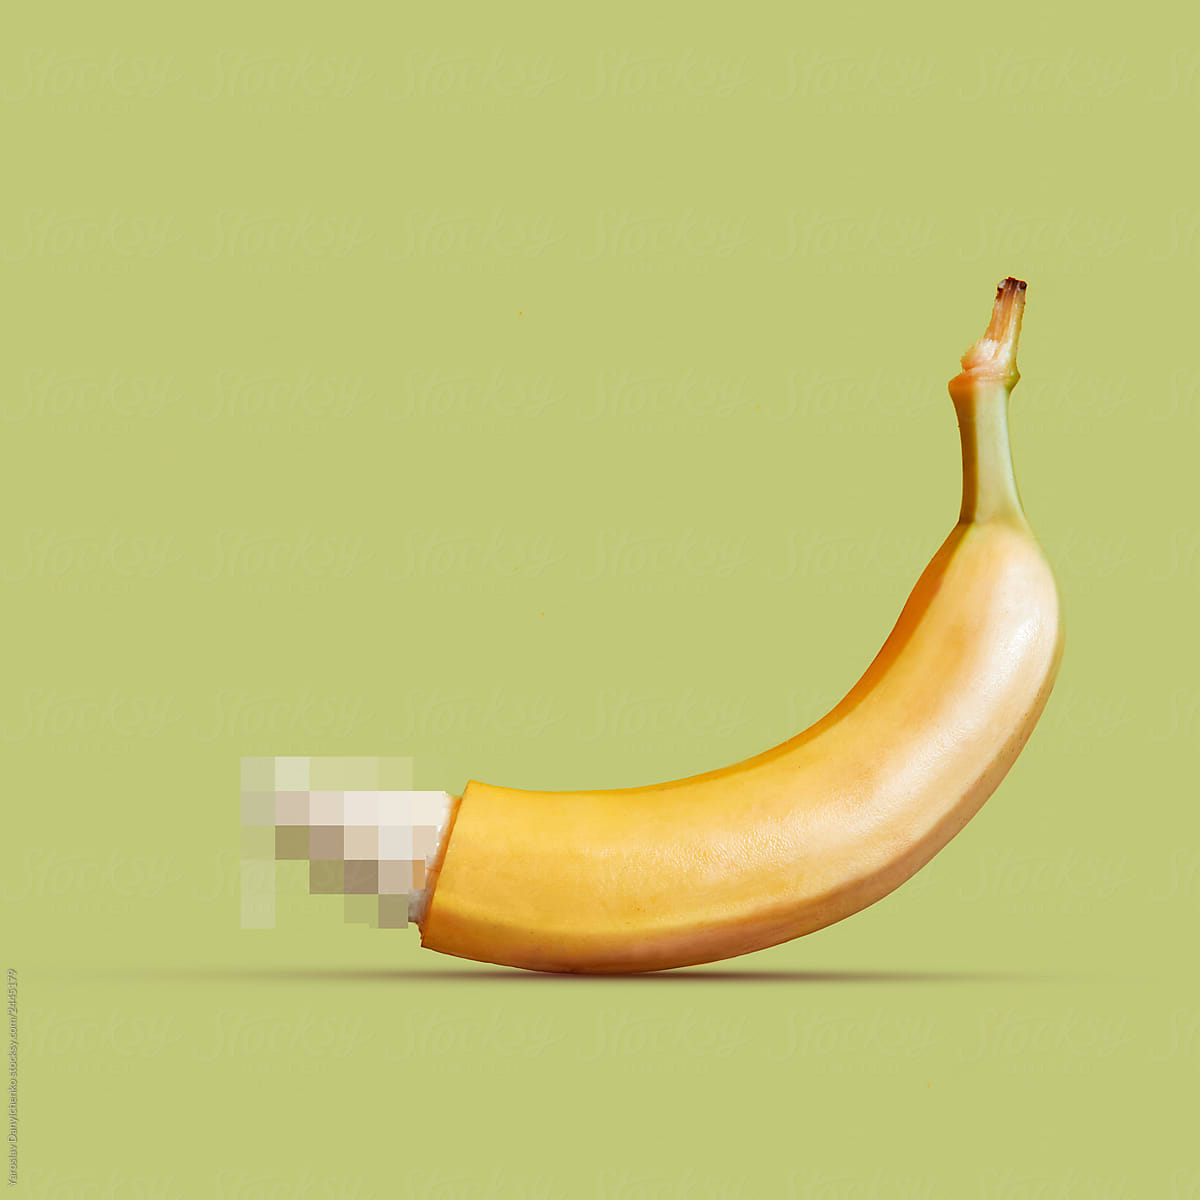 Large Banana As A Symbol Of The Penis On A Yellow Background. by Yaroslav Danylchenko